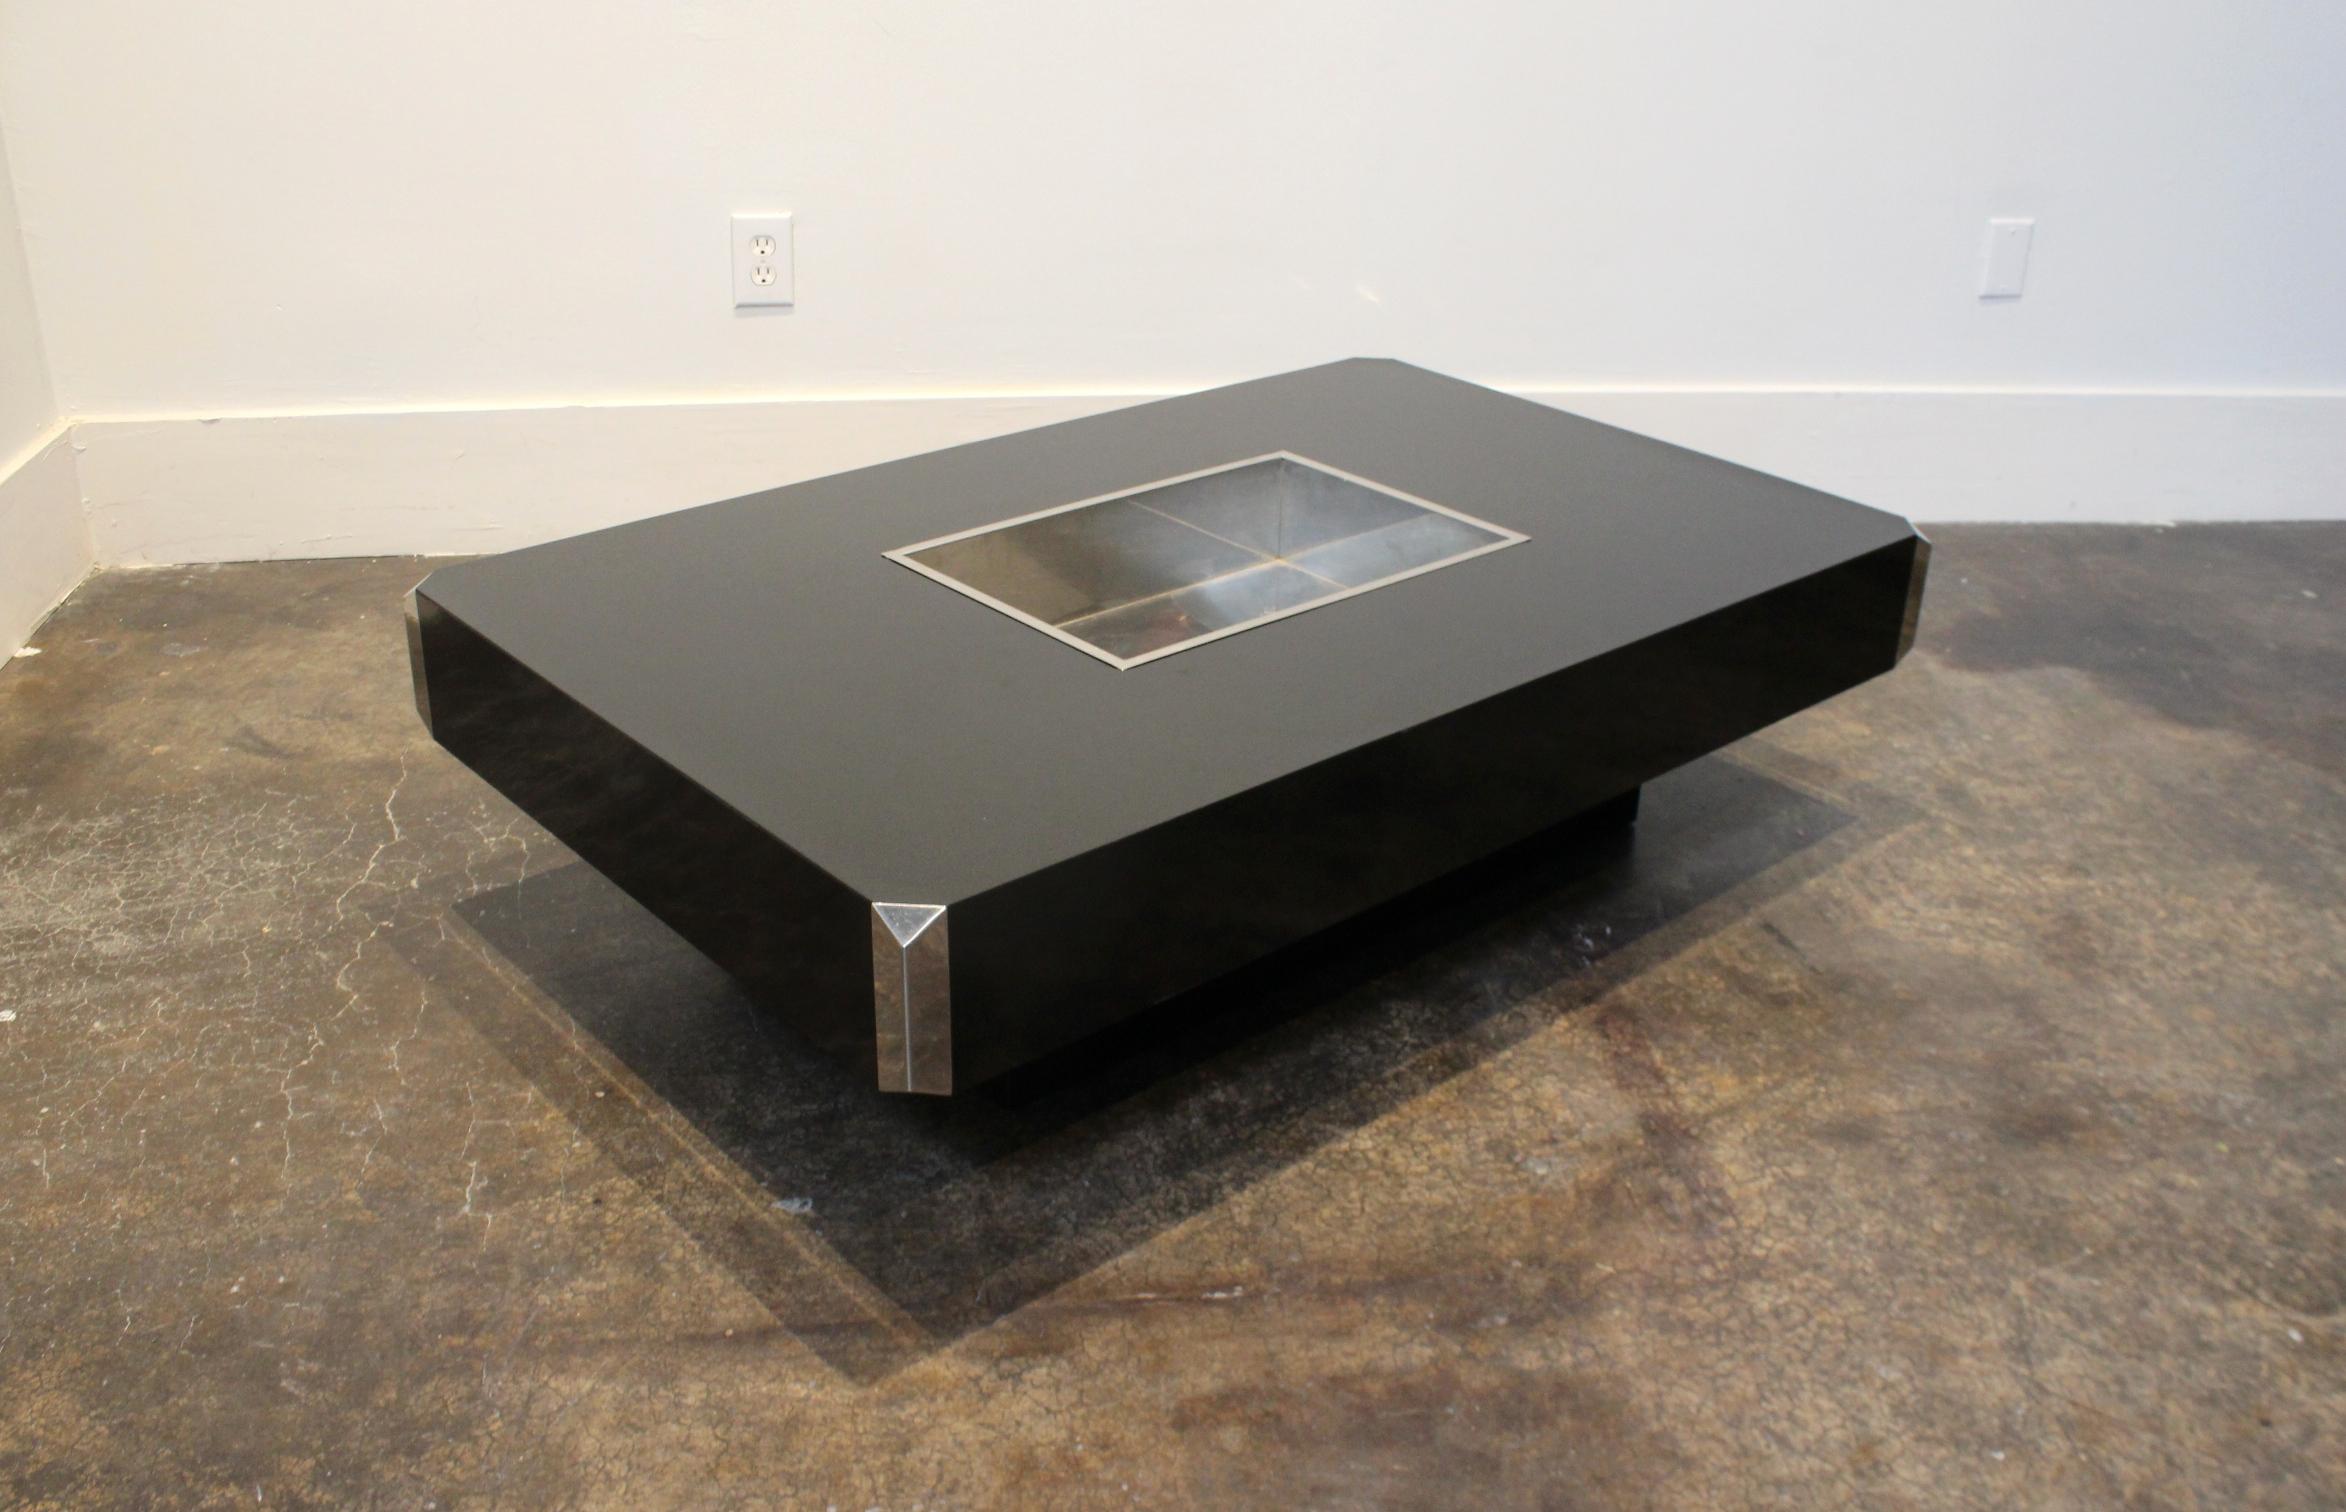 Black laminate and chromed steel coffee table designed by Willy Rizzo and manufactured by Mario Sabot in Italy in 1972. Corners highlighted in chromed steel. Steel basin in the middle can be used as an ice bucket or planter.